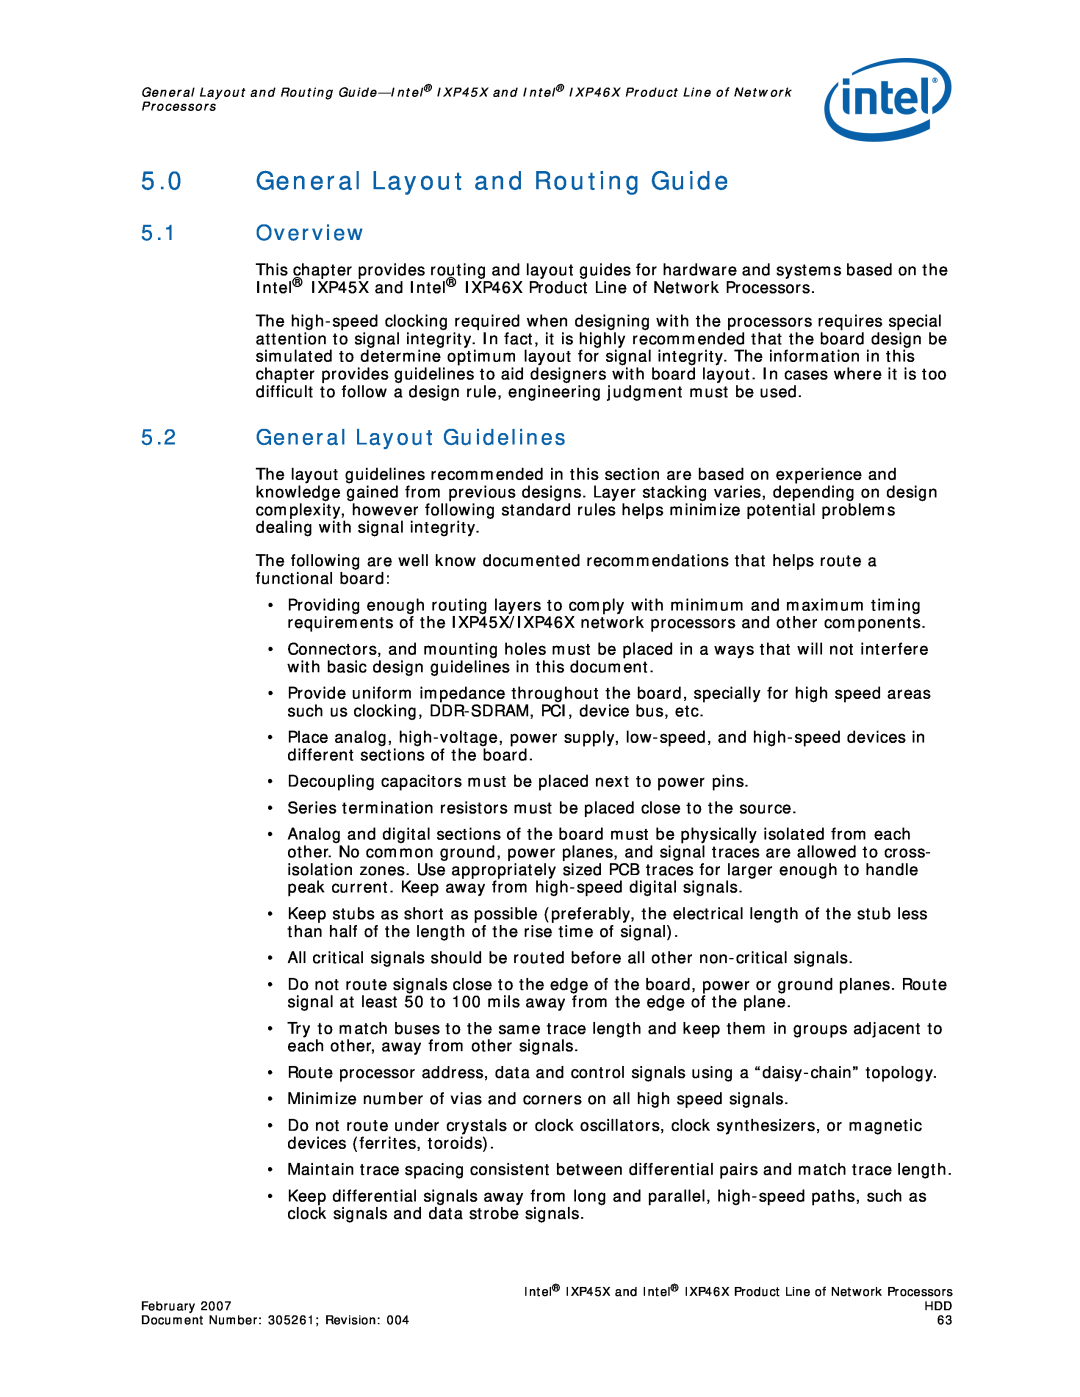 Intel IXP45X, IXP46X manual 5.0General Layout and Routing Guide, 5.1Overview, 5.2General Layout Guidelines 